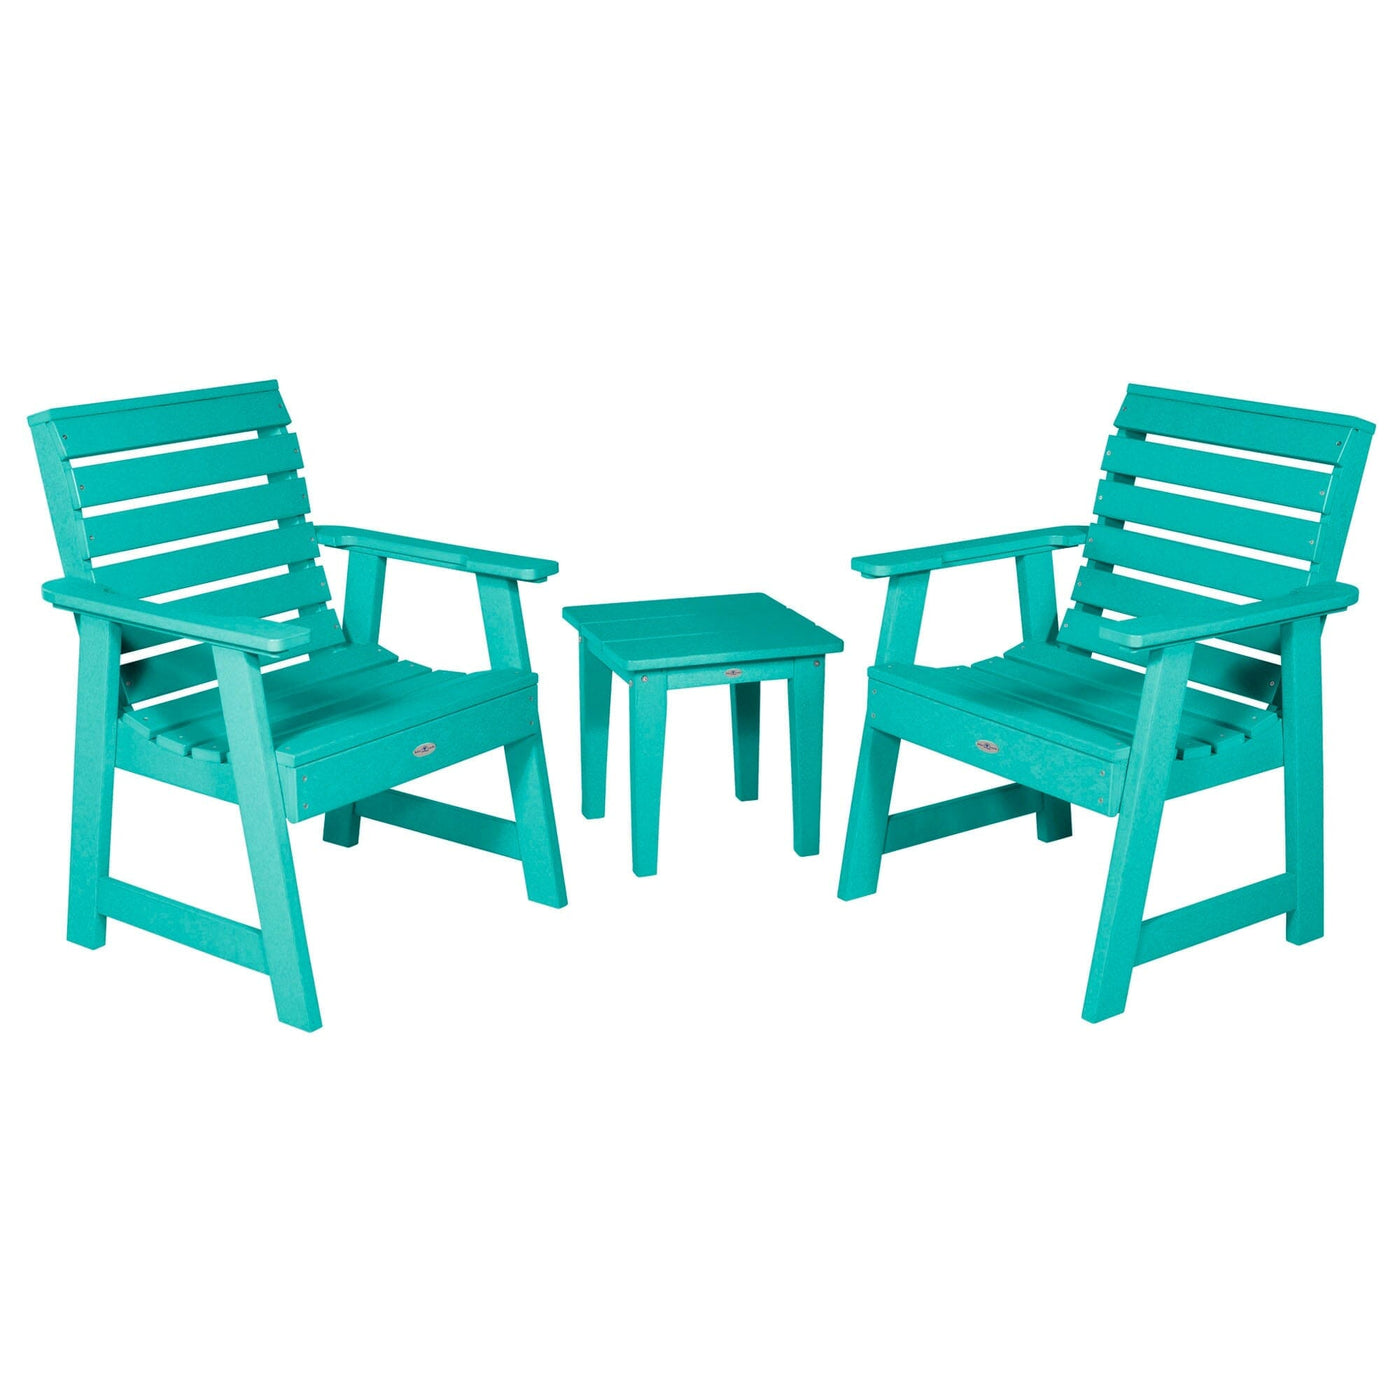 Two Riverside Garden Chairs and Side Table Set Kitted Set Bahia Verde Outdoors Seaglass Blue 